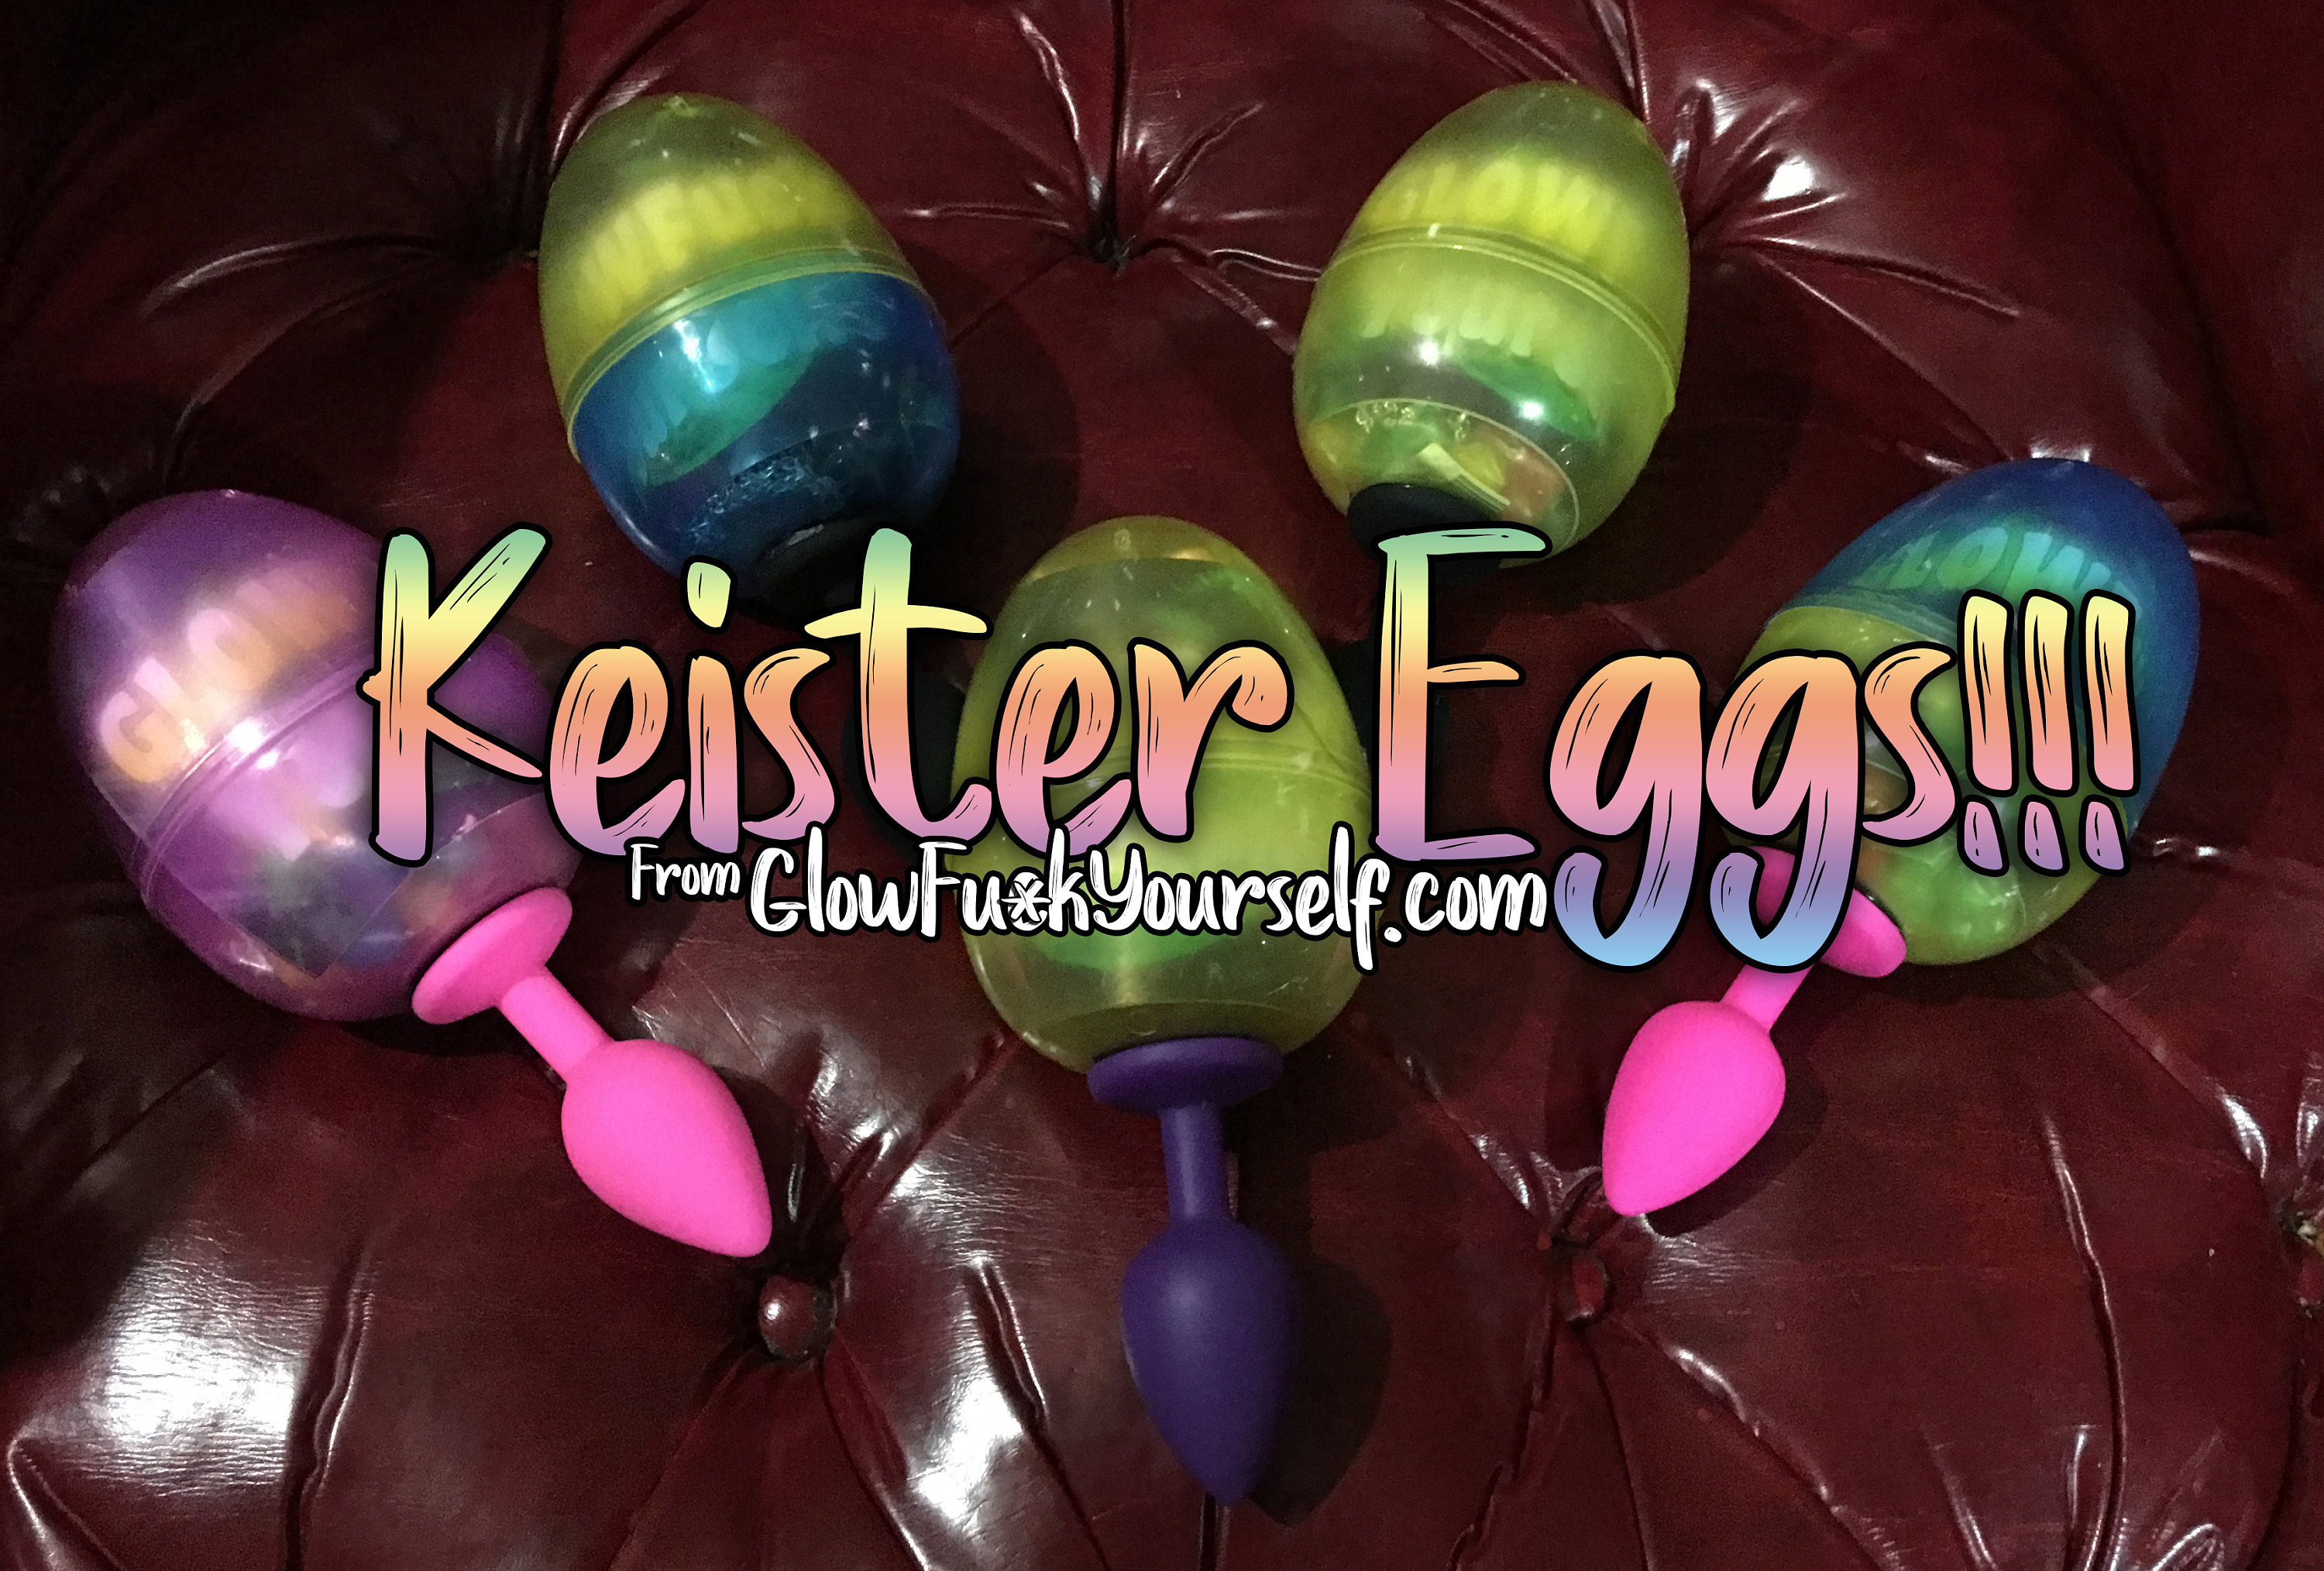 French Mature Nudist - Keister Egg Surprise Butt Plug Random Grab Bag of Booty - Etsy Norway